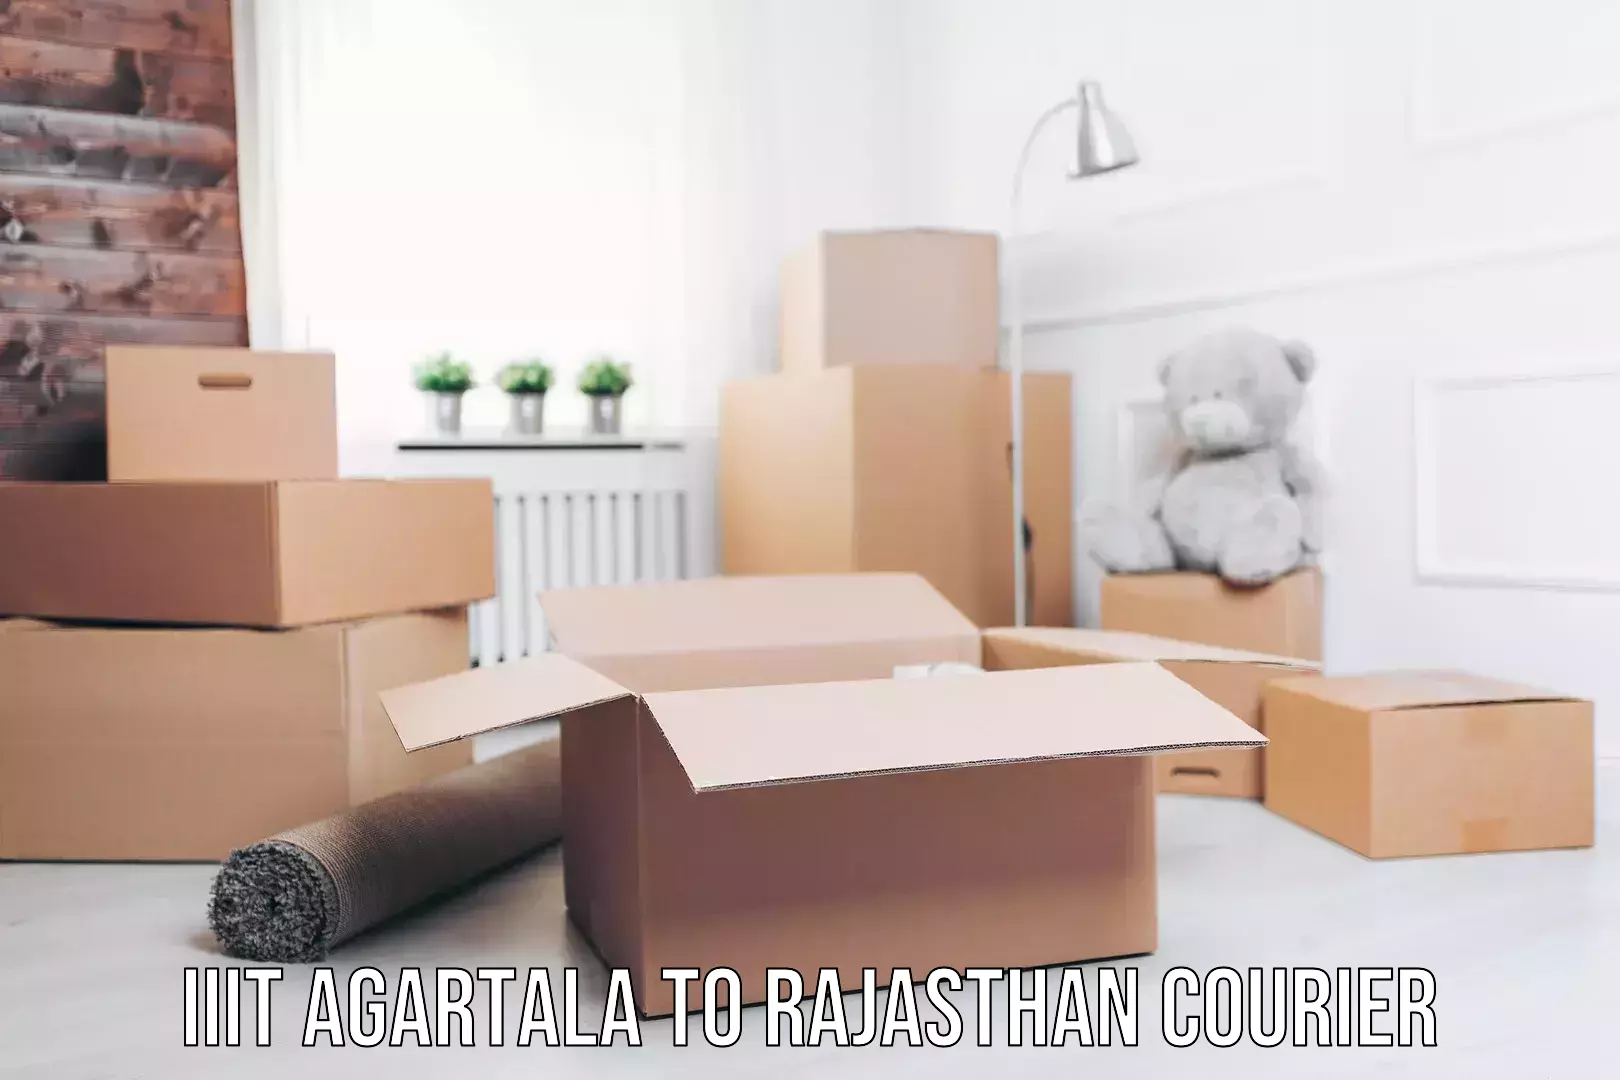 Reliable parcel services IIIT Agartala to Rajasthan